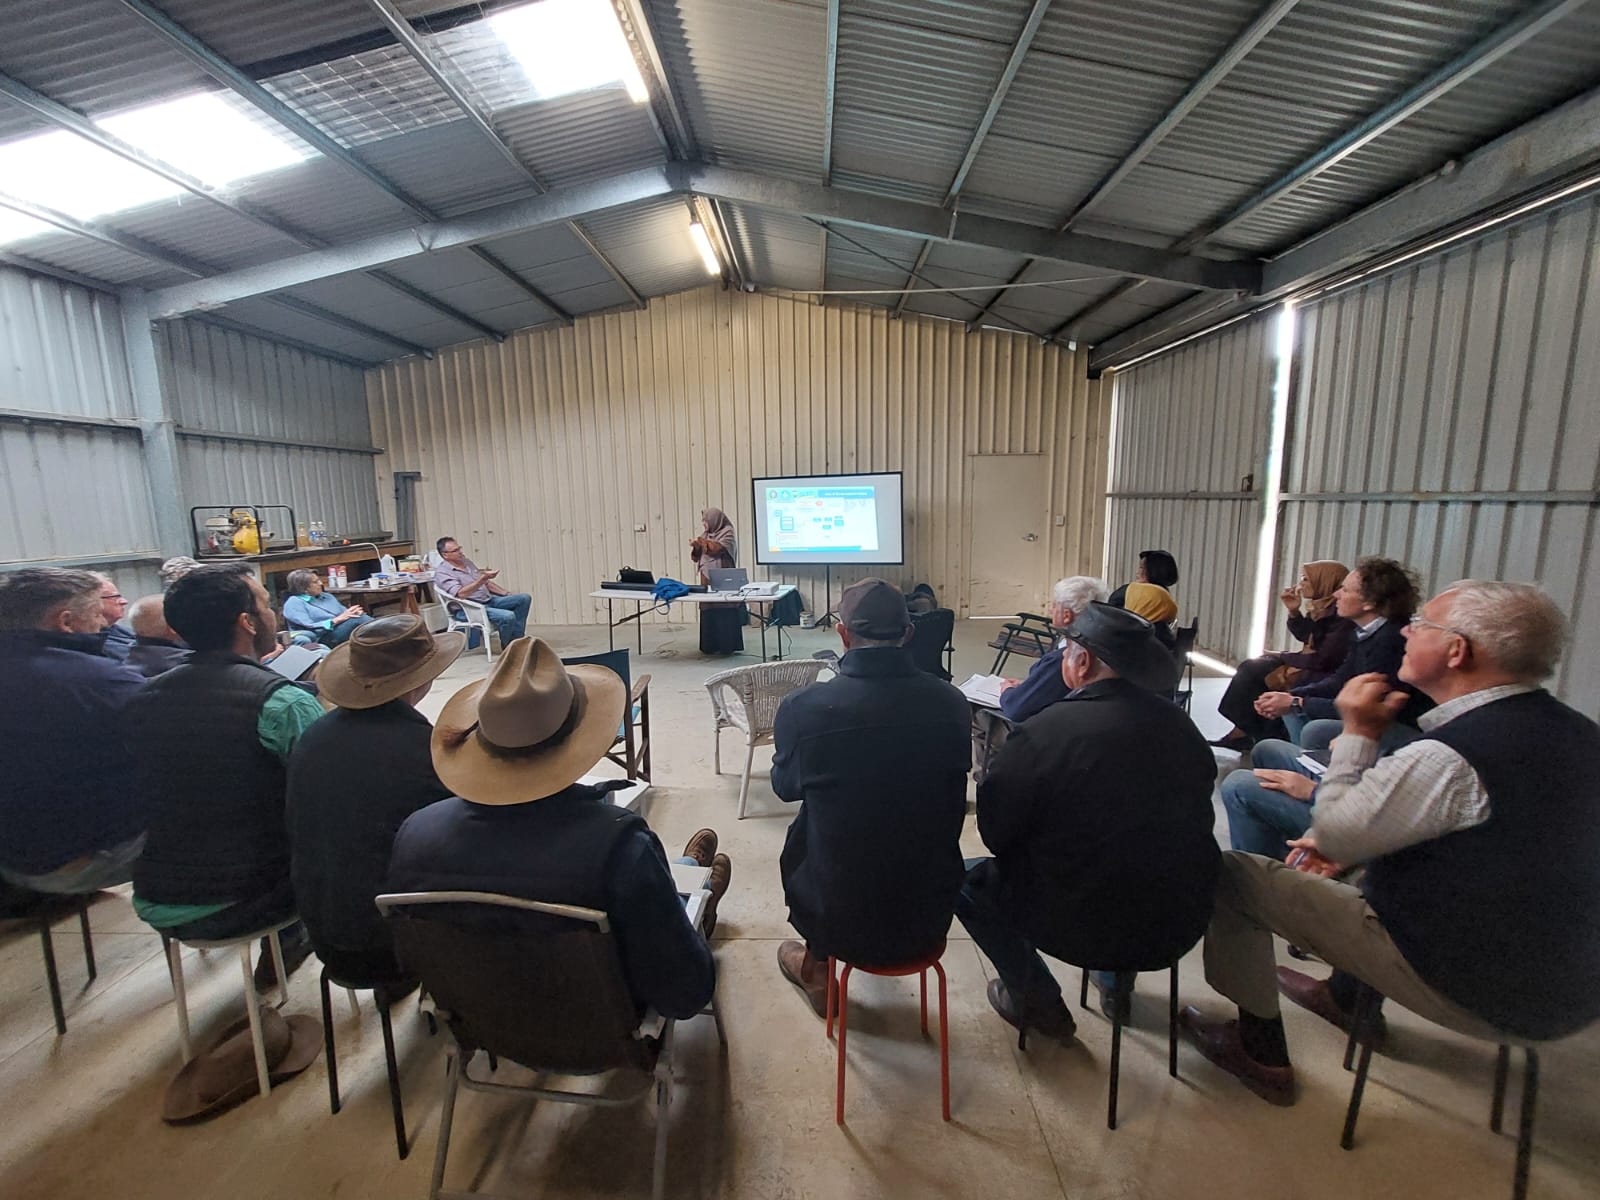 Faculty members from the Faculty of Animal Husbandry, Universitas Brawijaya (FAPET UB), are involved in the Beef Cattle Farmers Group activity in South Australia.